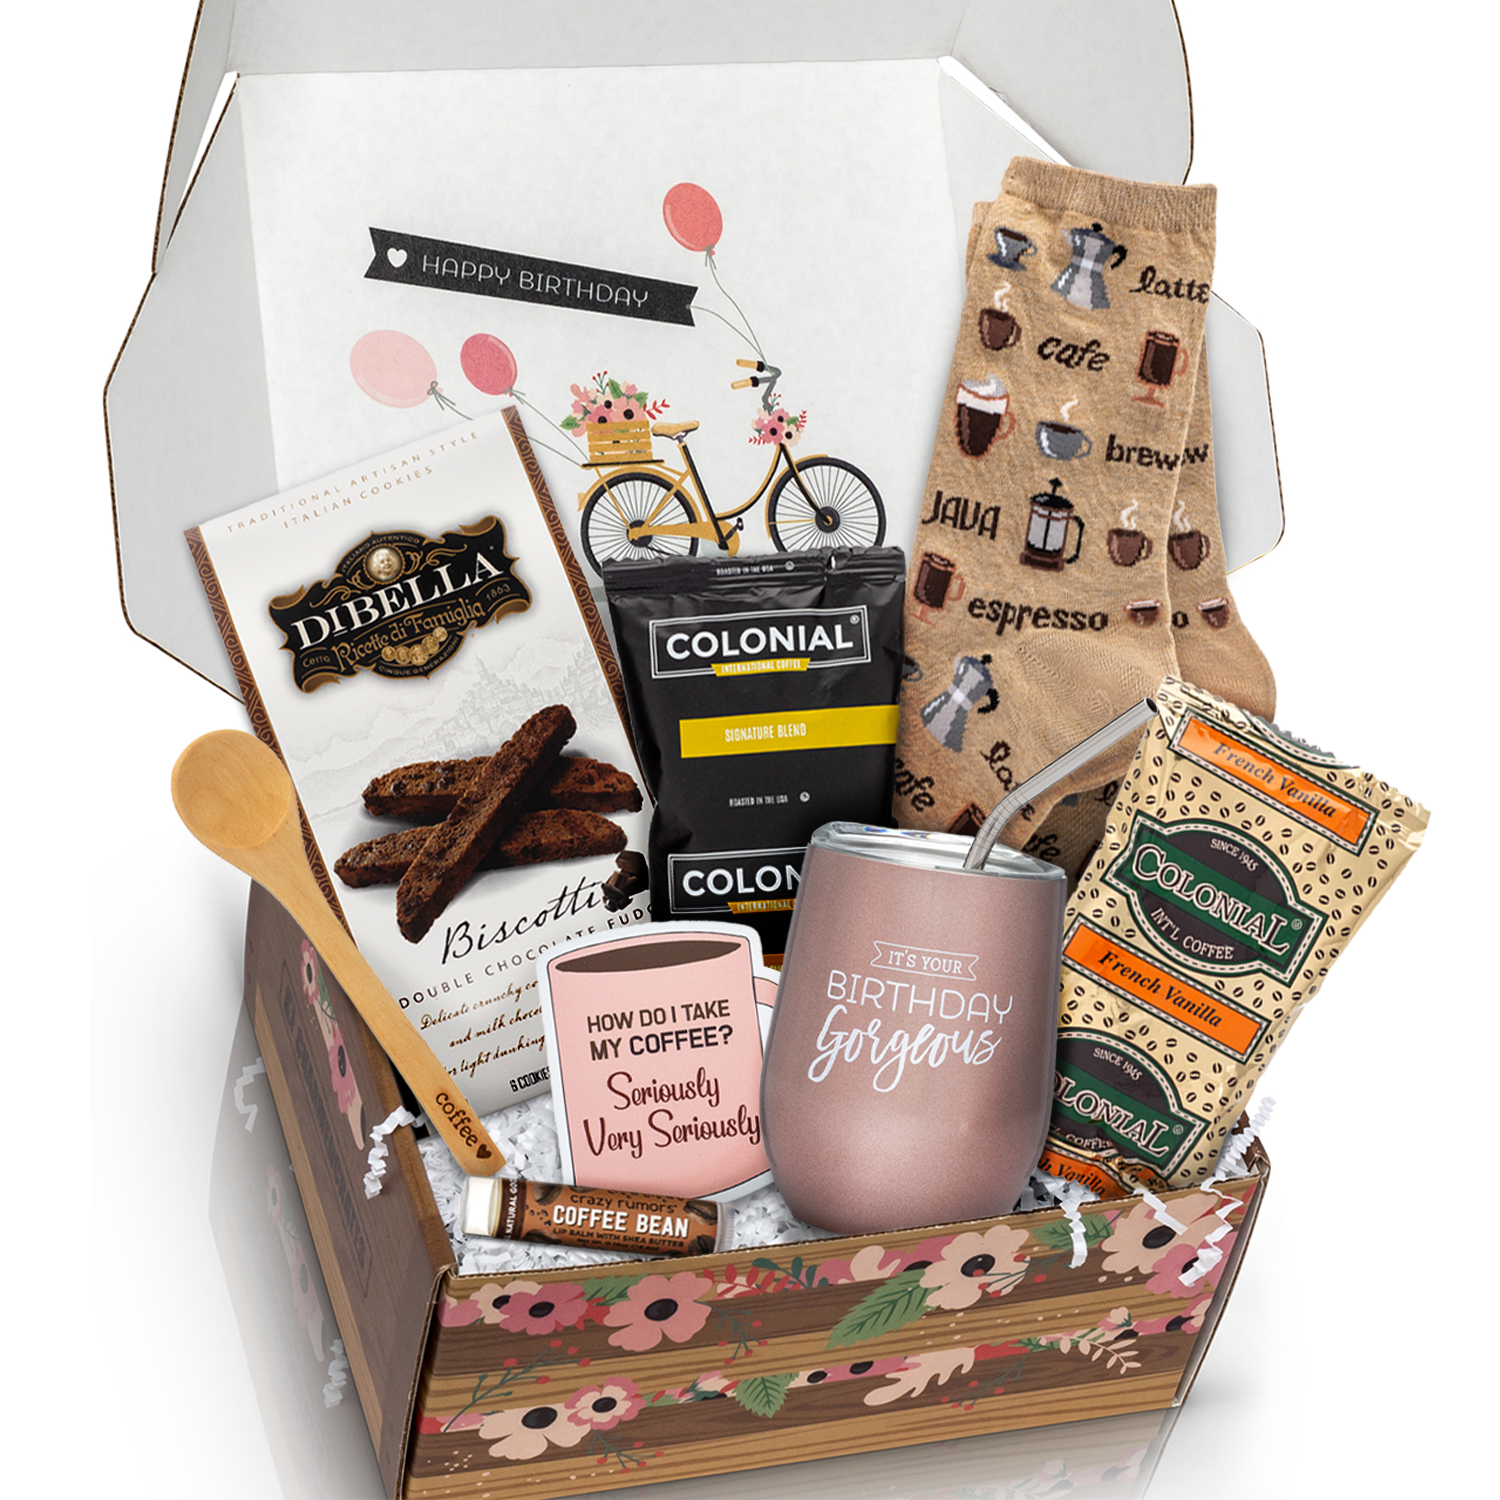 https://www.momjunction.com/wp-content/uploads/product-images/charmed-crates-birthday-box-coffee-gift-basket_afl1130.png.webp